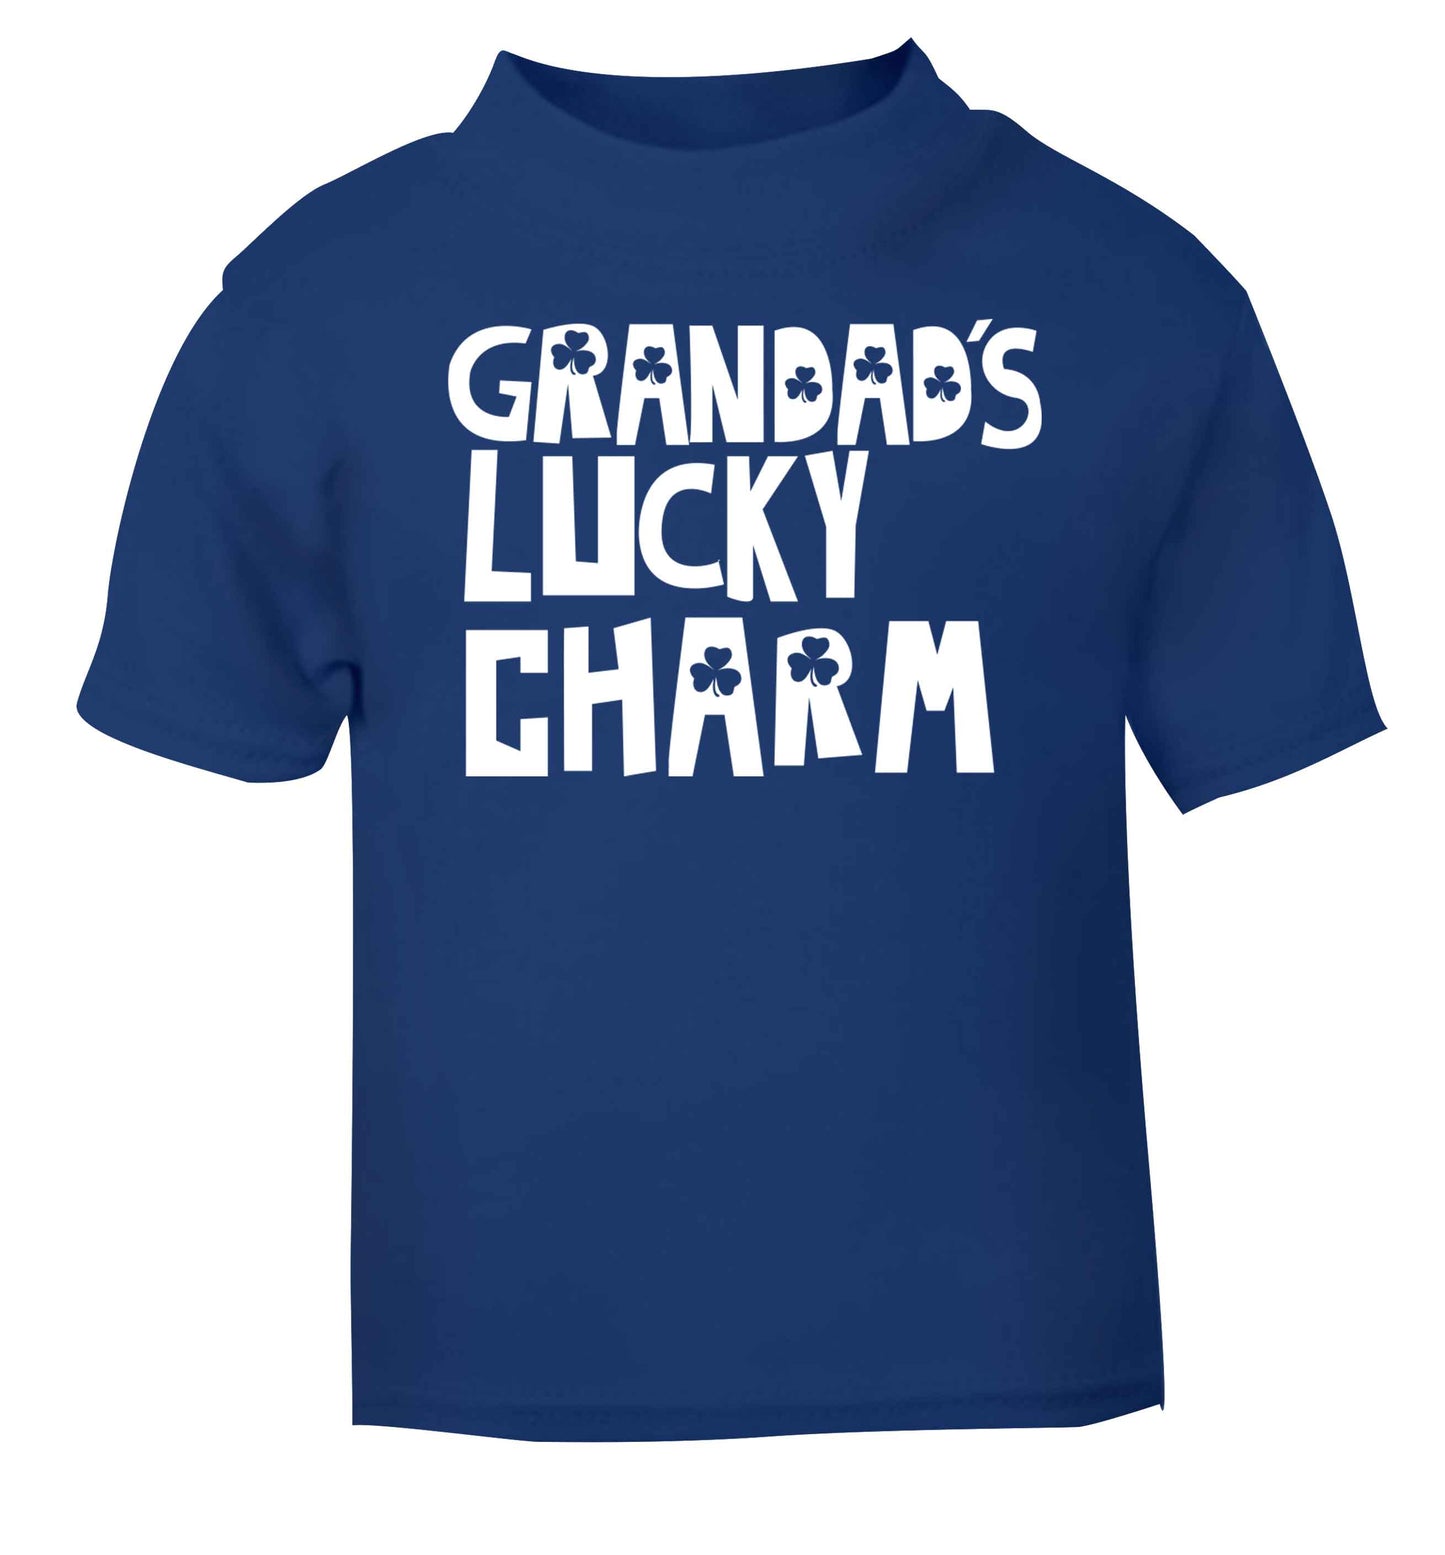 Grandad's lucky charm  blue baby toddler Tshirt 2 Years